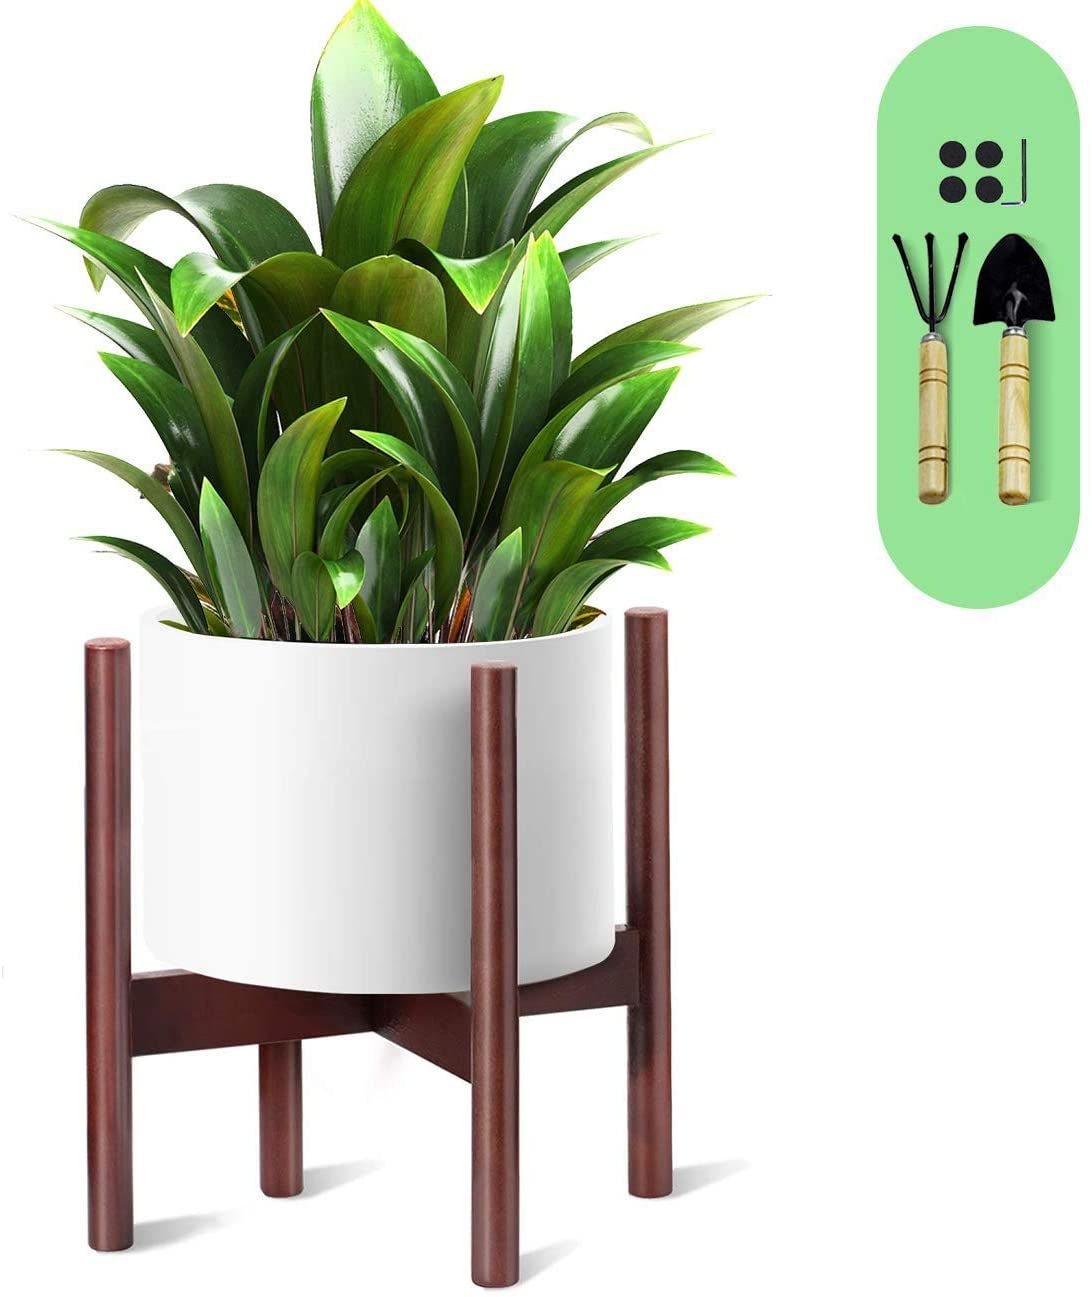 Plant Stand Wooden 10 Inch With 1 Trowel And 1 Rake Beech Wood Flower Stand  Pot Stand Plant Stand Holder Pot Not Included – Walmart Throughout 10 Inch Plant Stands (View 1 of 15)